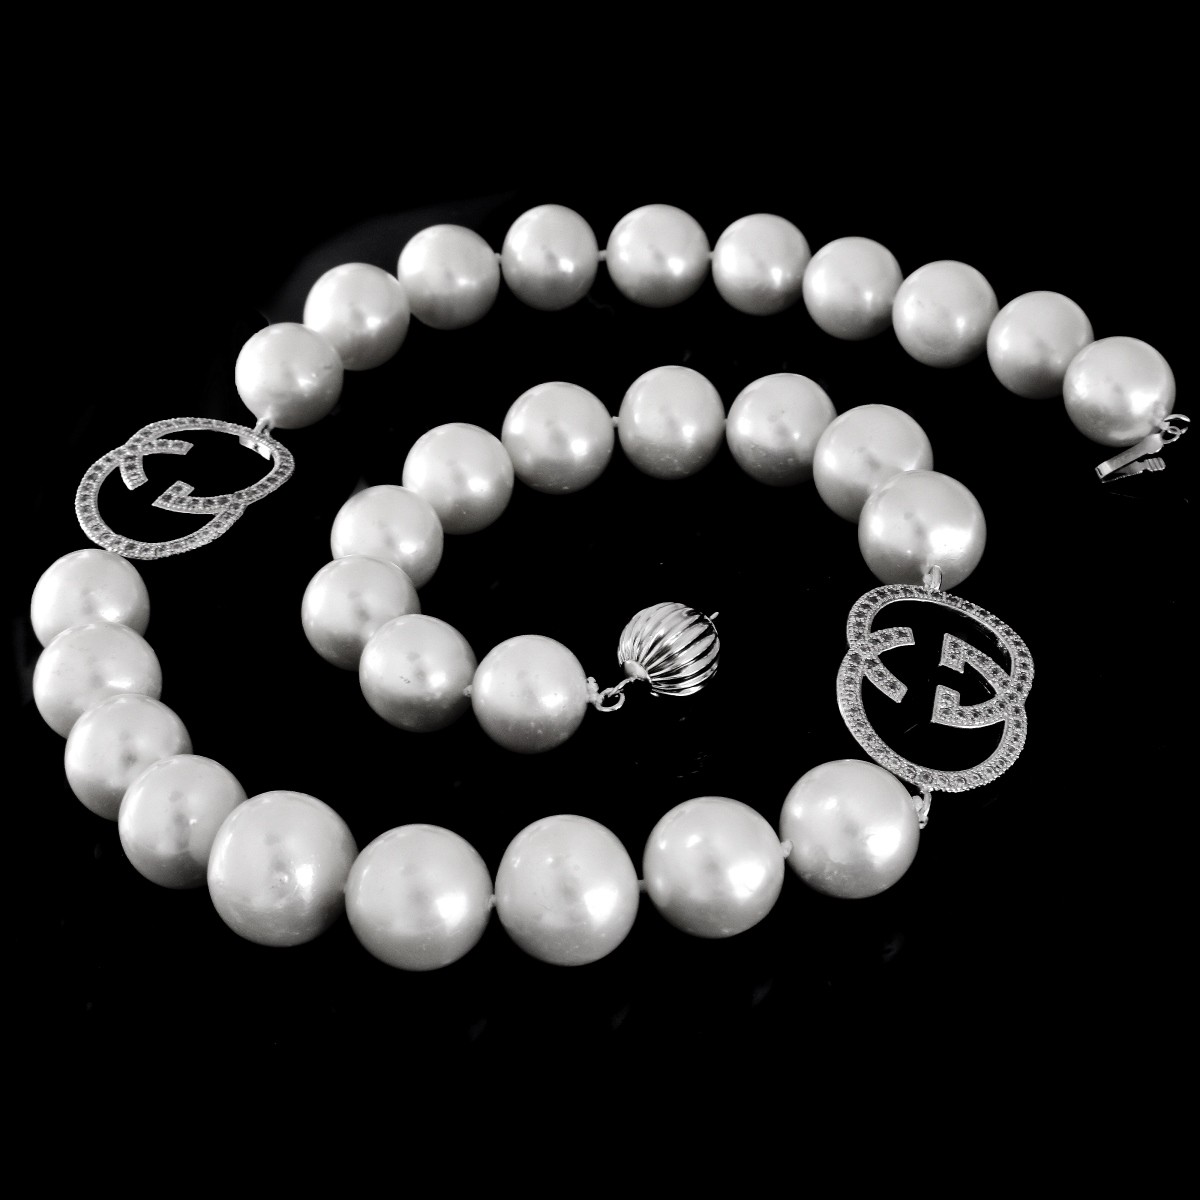 12-13mm South Sea Pearl Necklace